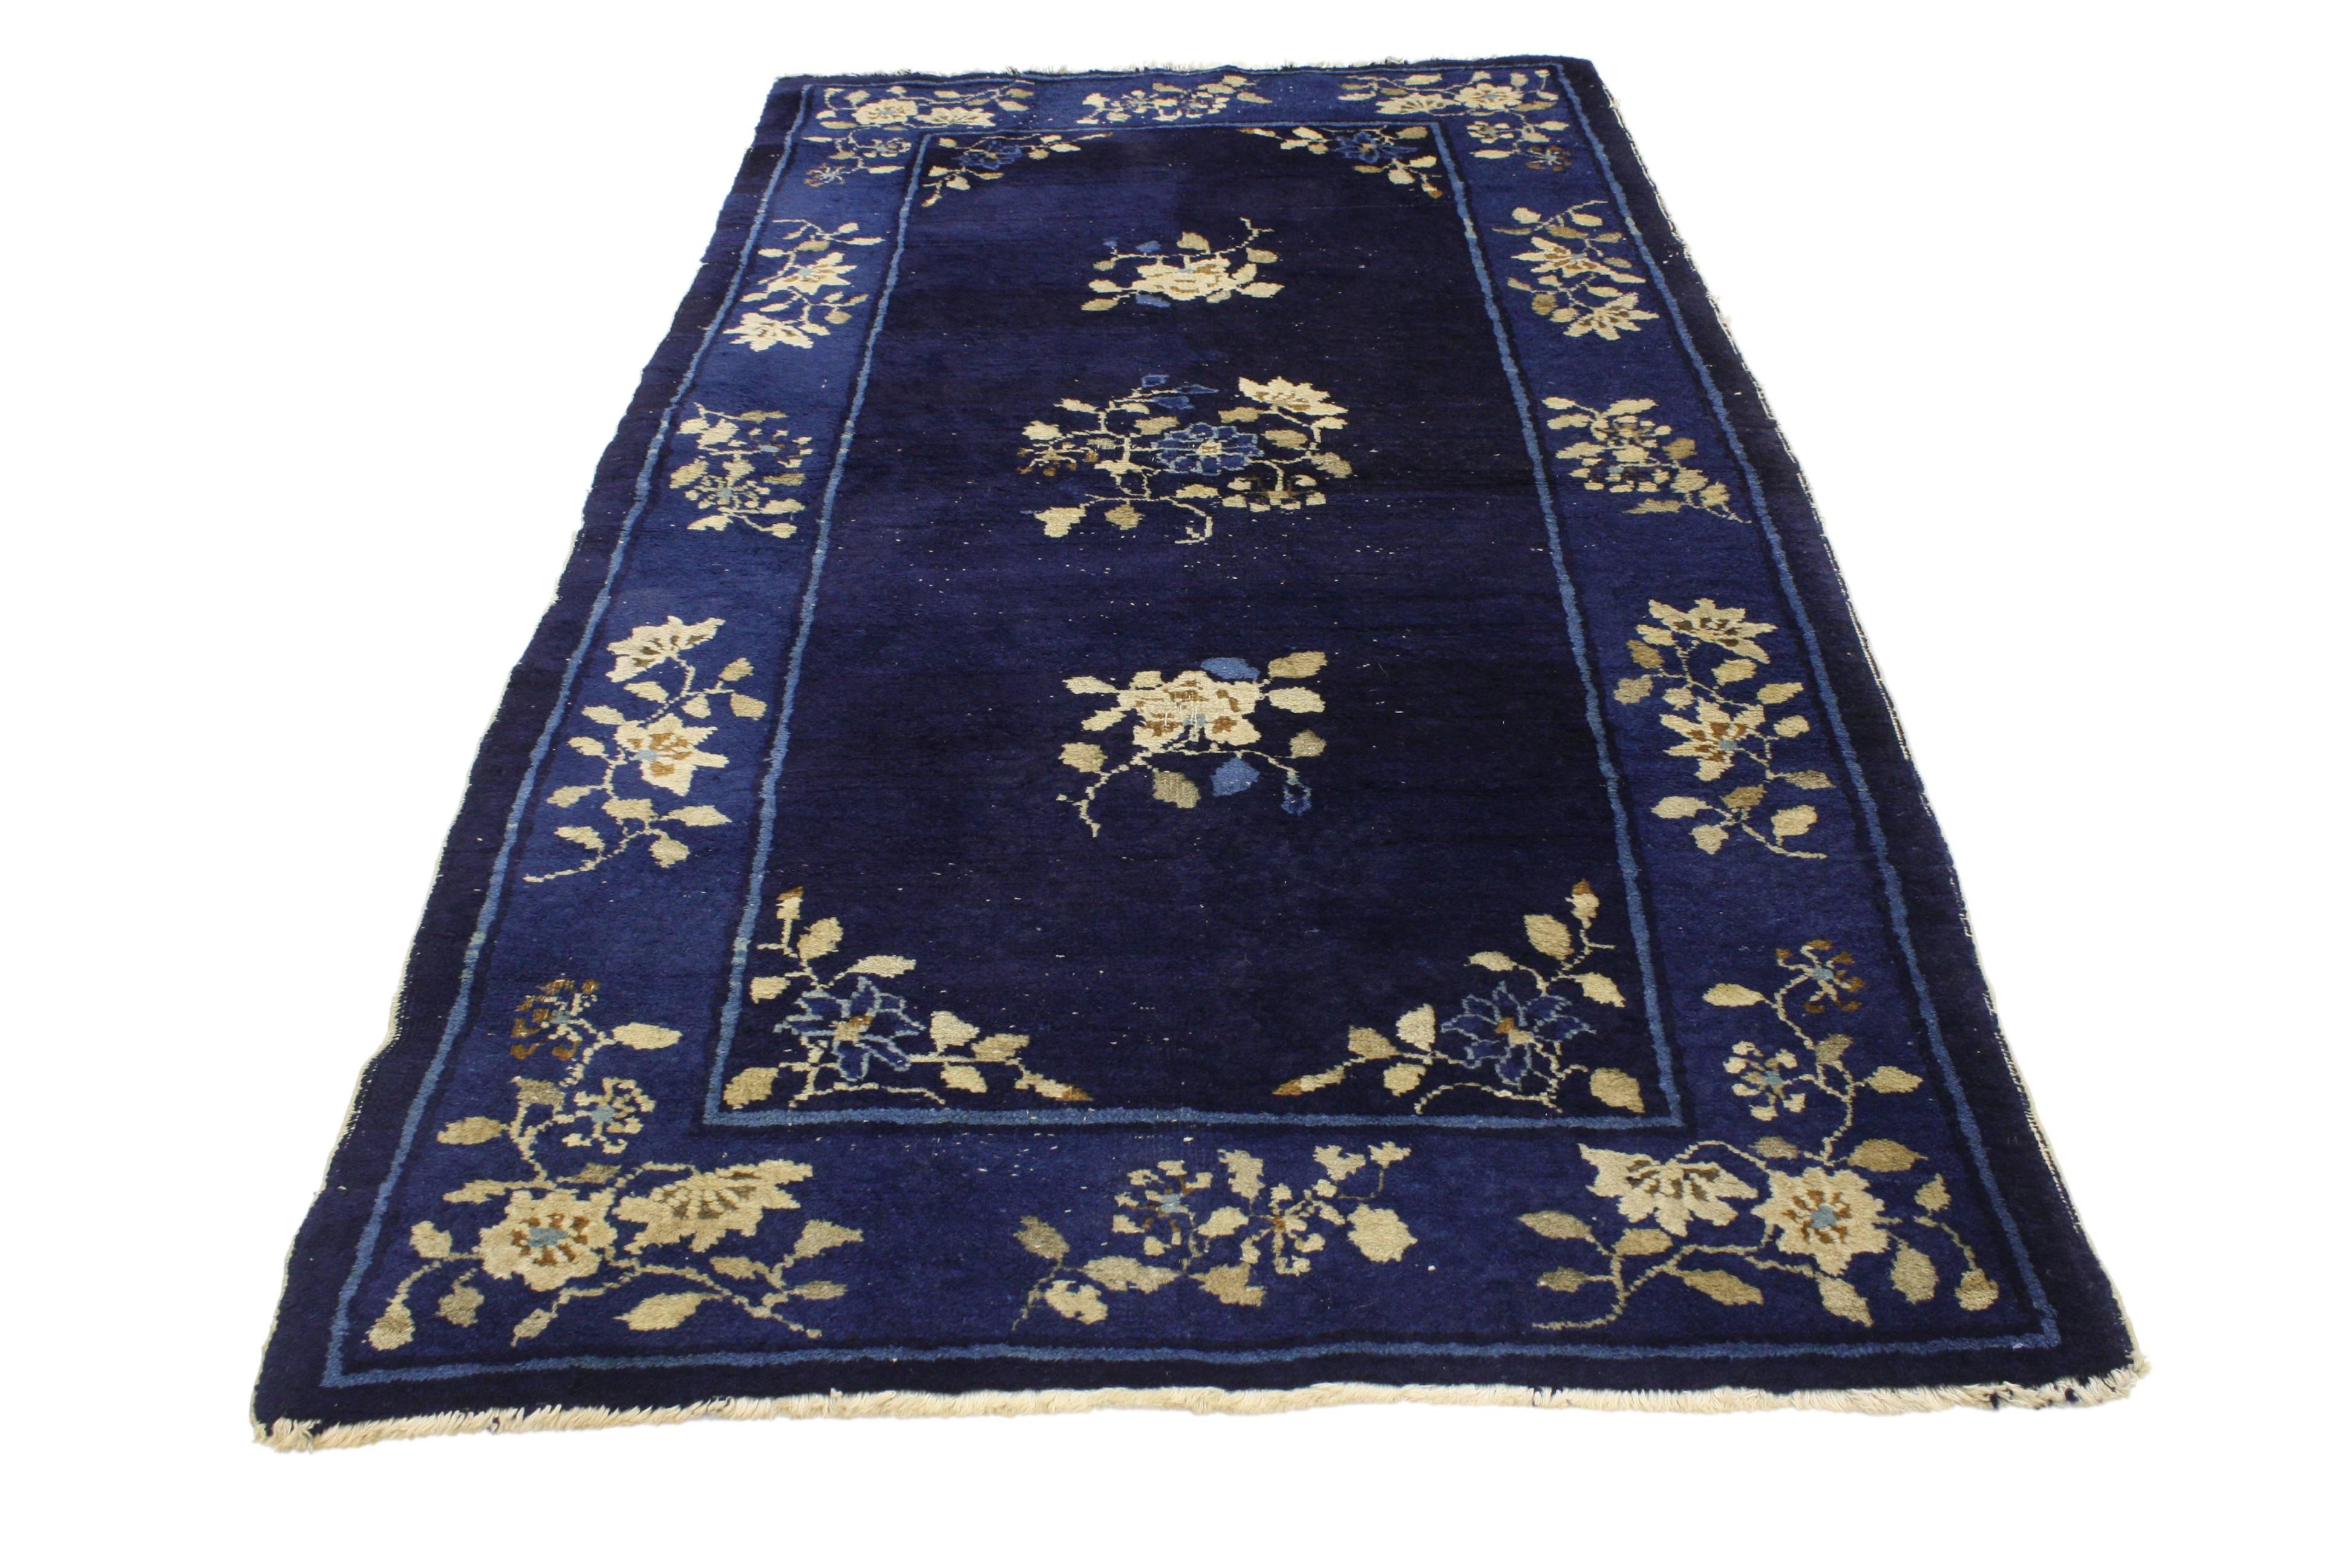 Wool Antique Chinese Art Deco Rug with Romantic Chinoiserie Style